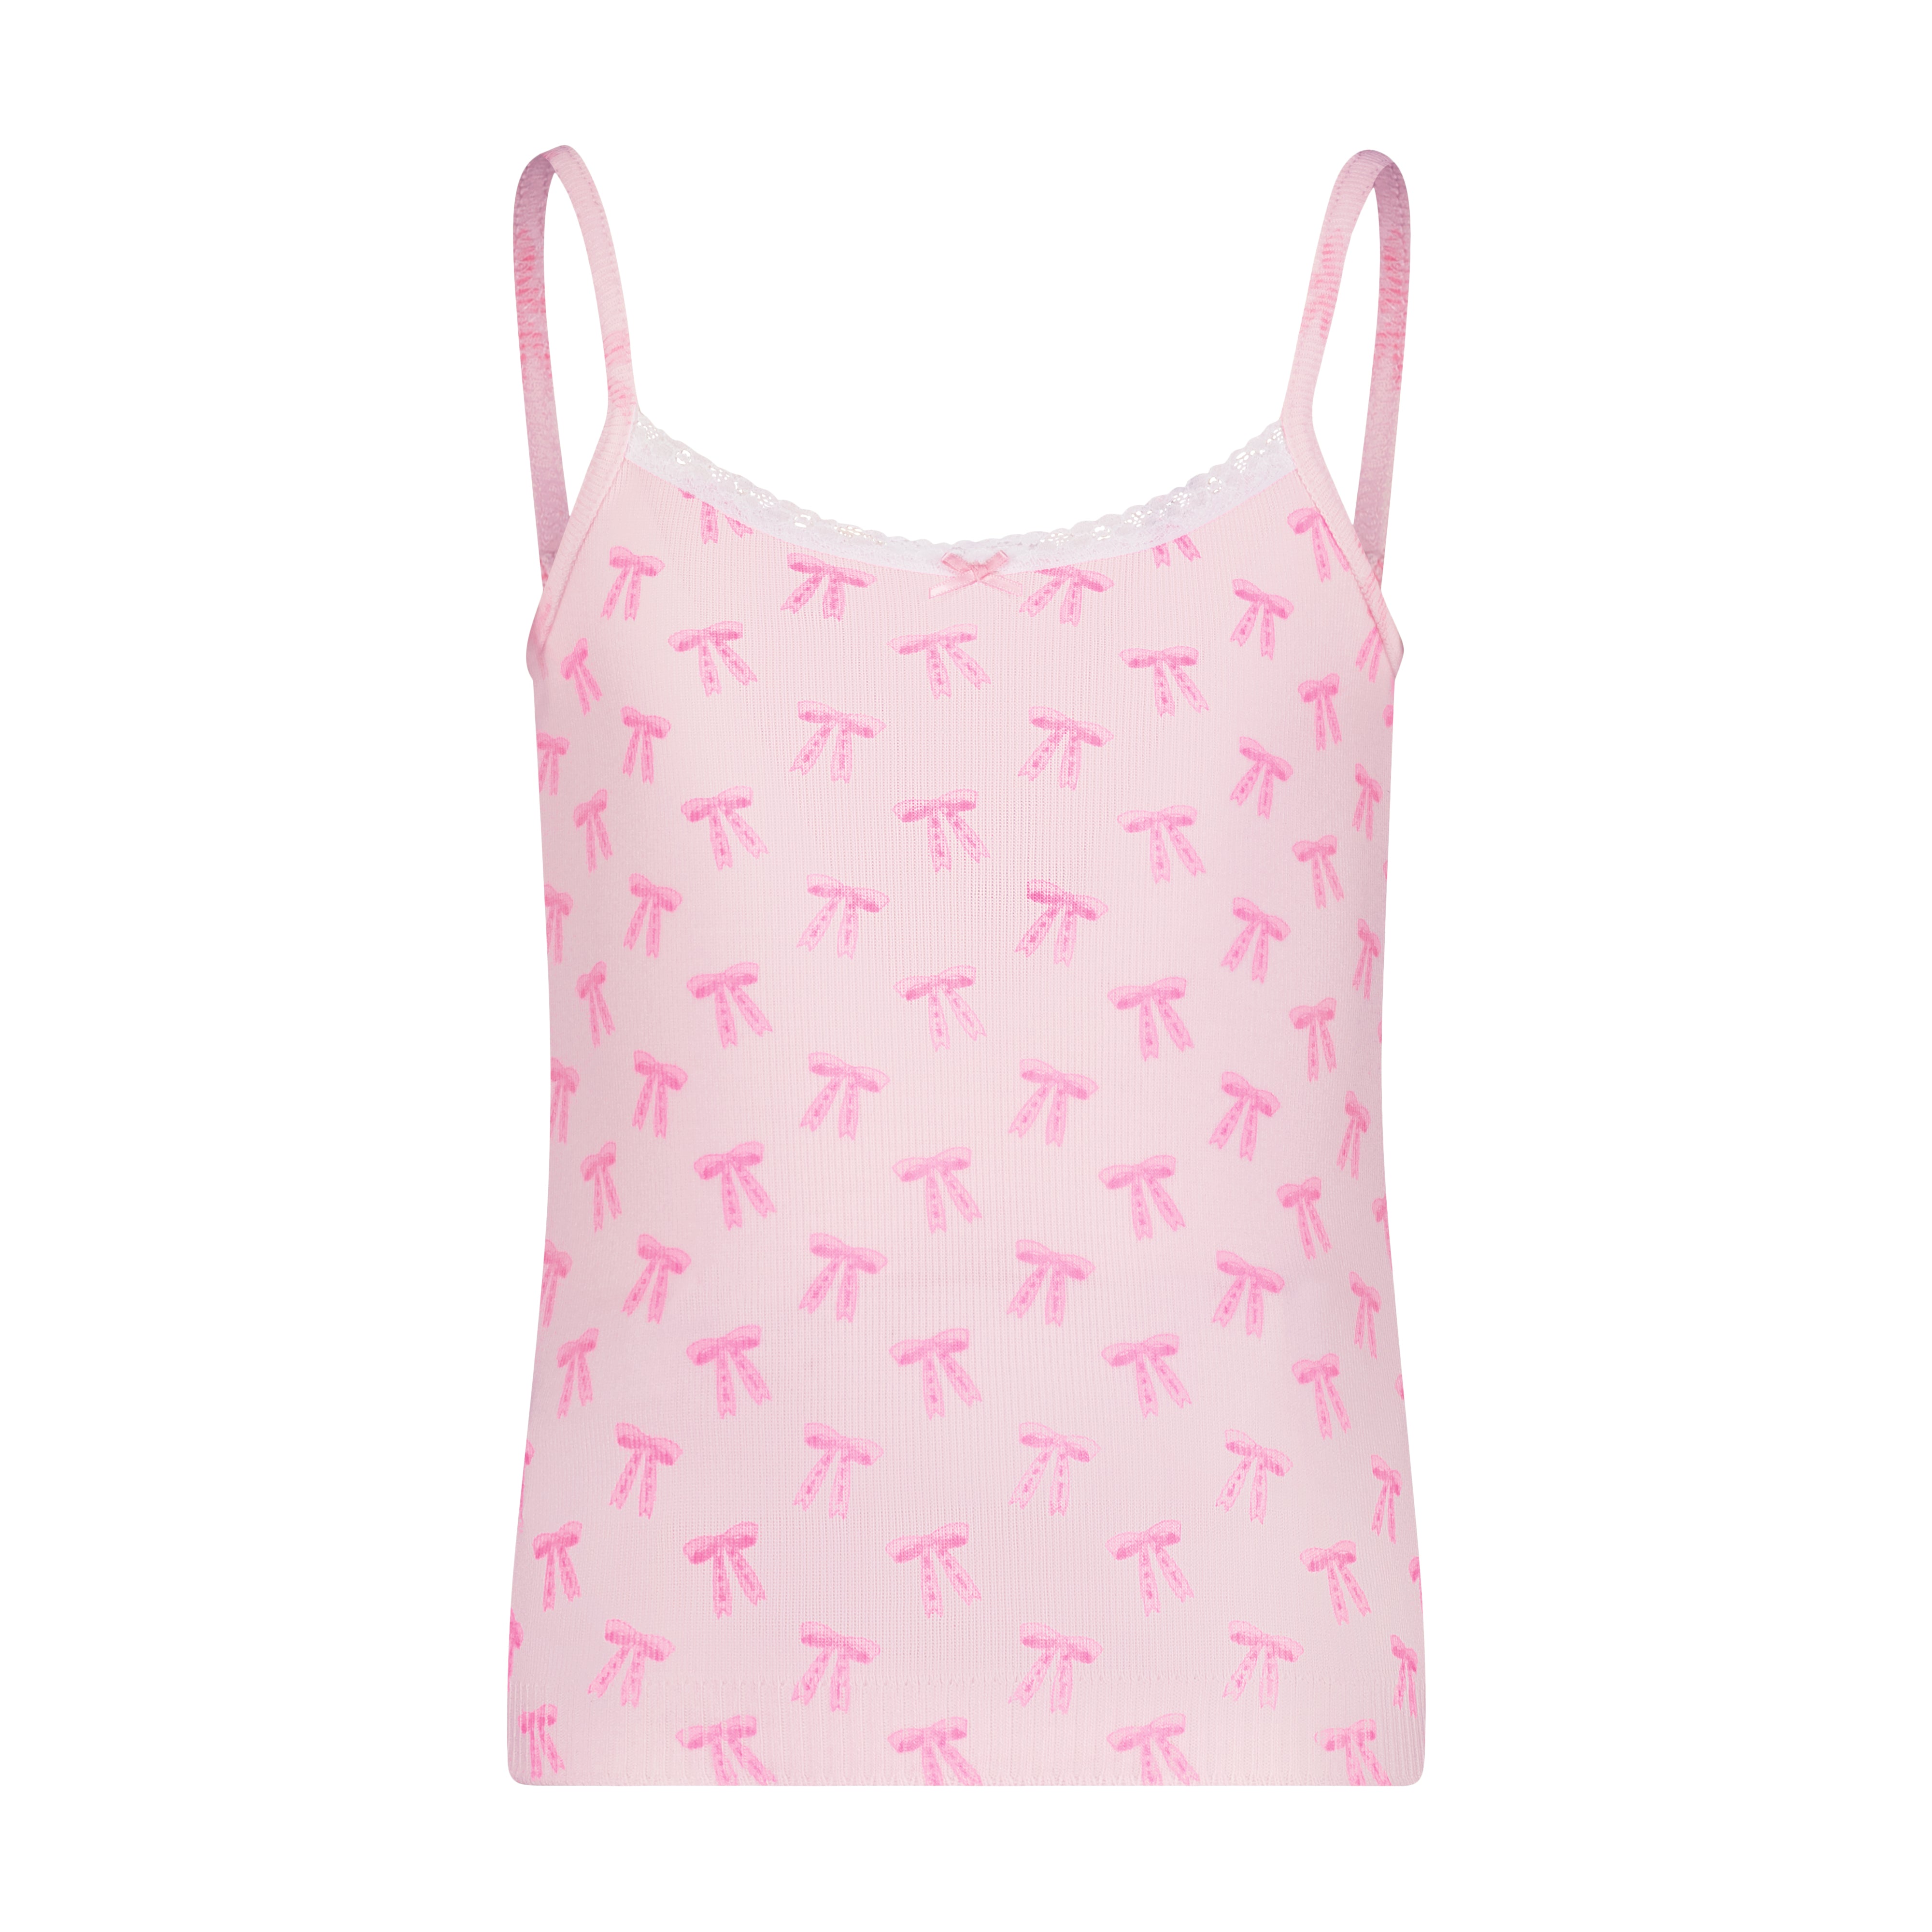 GIRLS CAMISOLE Forever Love Bow Print